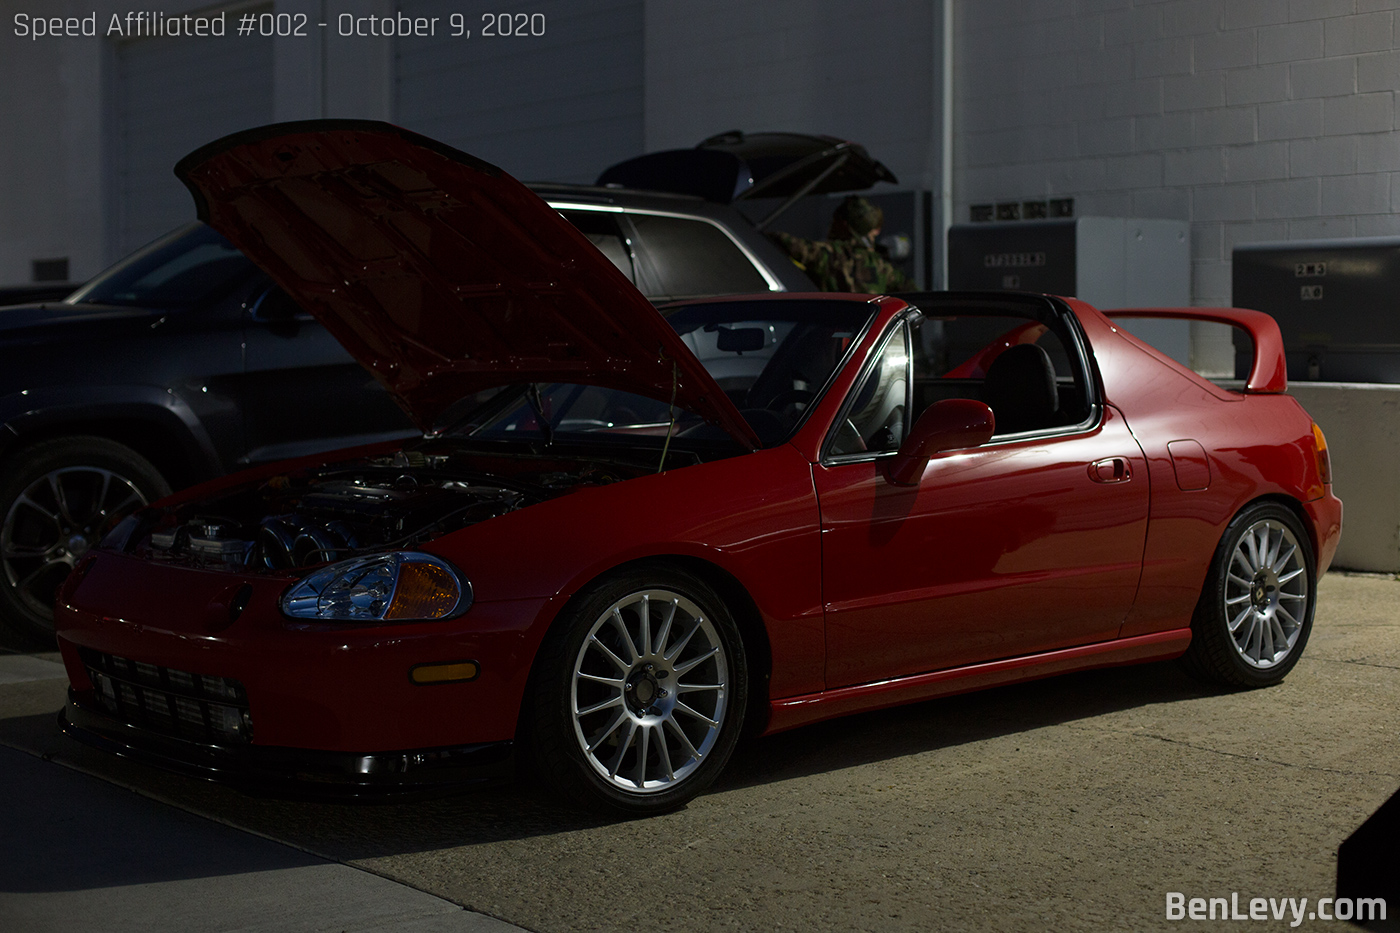 Red Honda del Sol at Nighttime meet at Midwest Modded